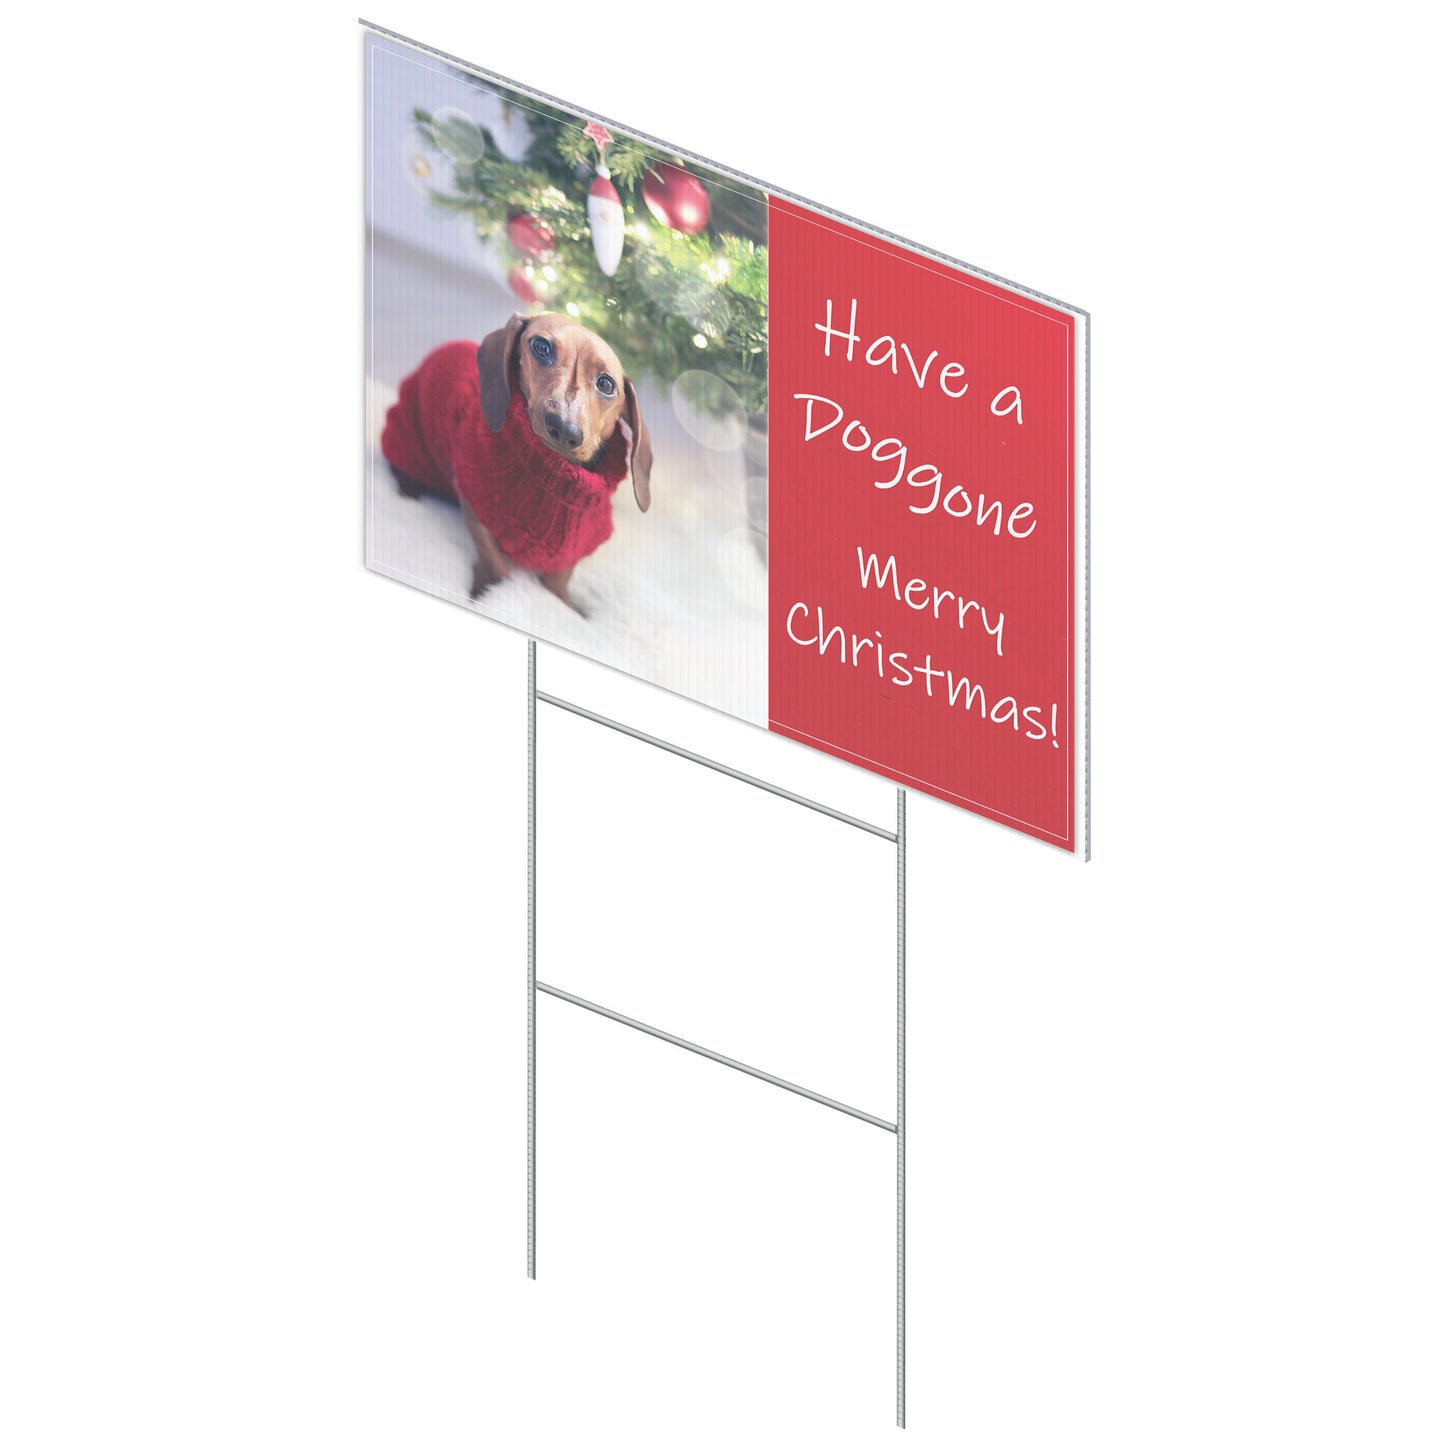 Have a Doggone Merry Christmas Yard Sign - Signs and Seasons Gifts